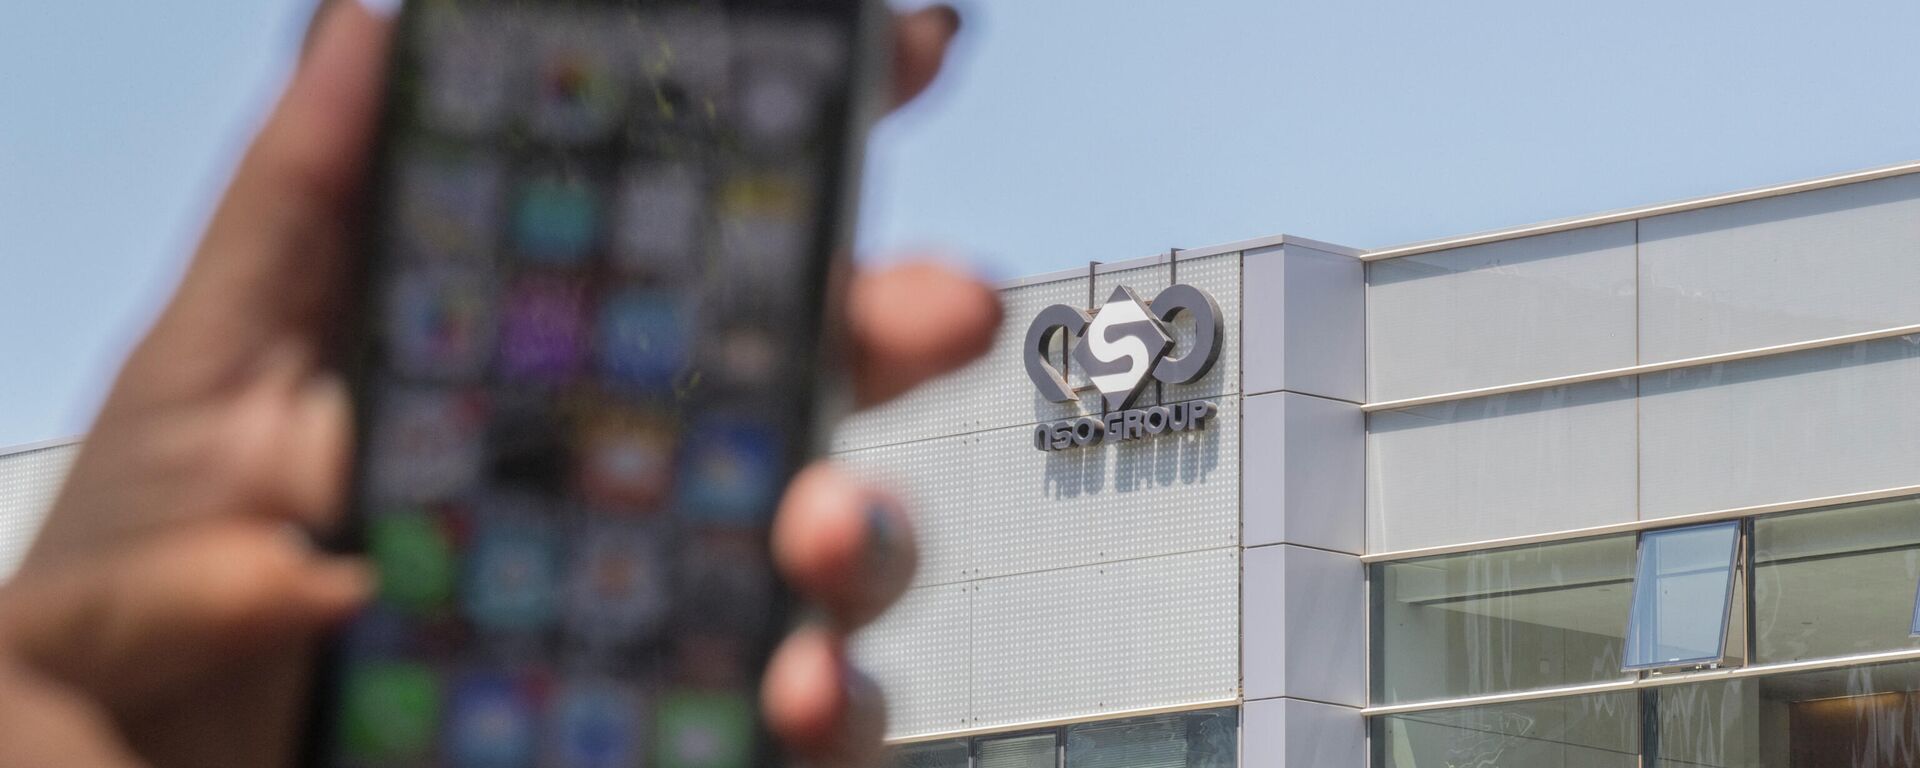 An Israeli woman uses her iPhone in front of the building housing the Israeli NSO group, on August 28, 2016, in Herzliya, near Tel Aviv. - Apple iPhone owners, earlier in the week, were urged to install a quickly released security update after a sophisticated attack on an Emirati dissident exposed vulnerabilities targeted by cyber arms dealers.
Lookout and Citizen Lab worked with Apple on an iOS patch to defend against what was called Trident because of its triad of attack methods, the researchers said in a joint blog post.
Trident is used in spyware referred to as Pegasus, which a Citizen Lab investigation showed was made by an Israel-based organization called NSO Group. - Sputnik International, 1920, 14.12.2021